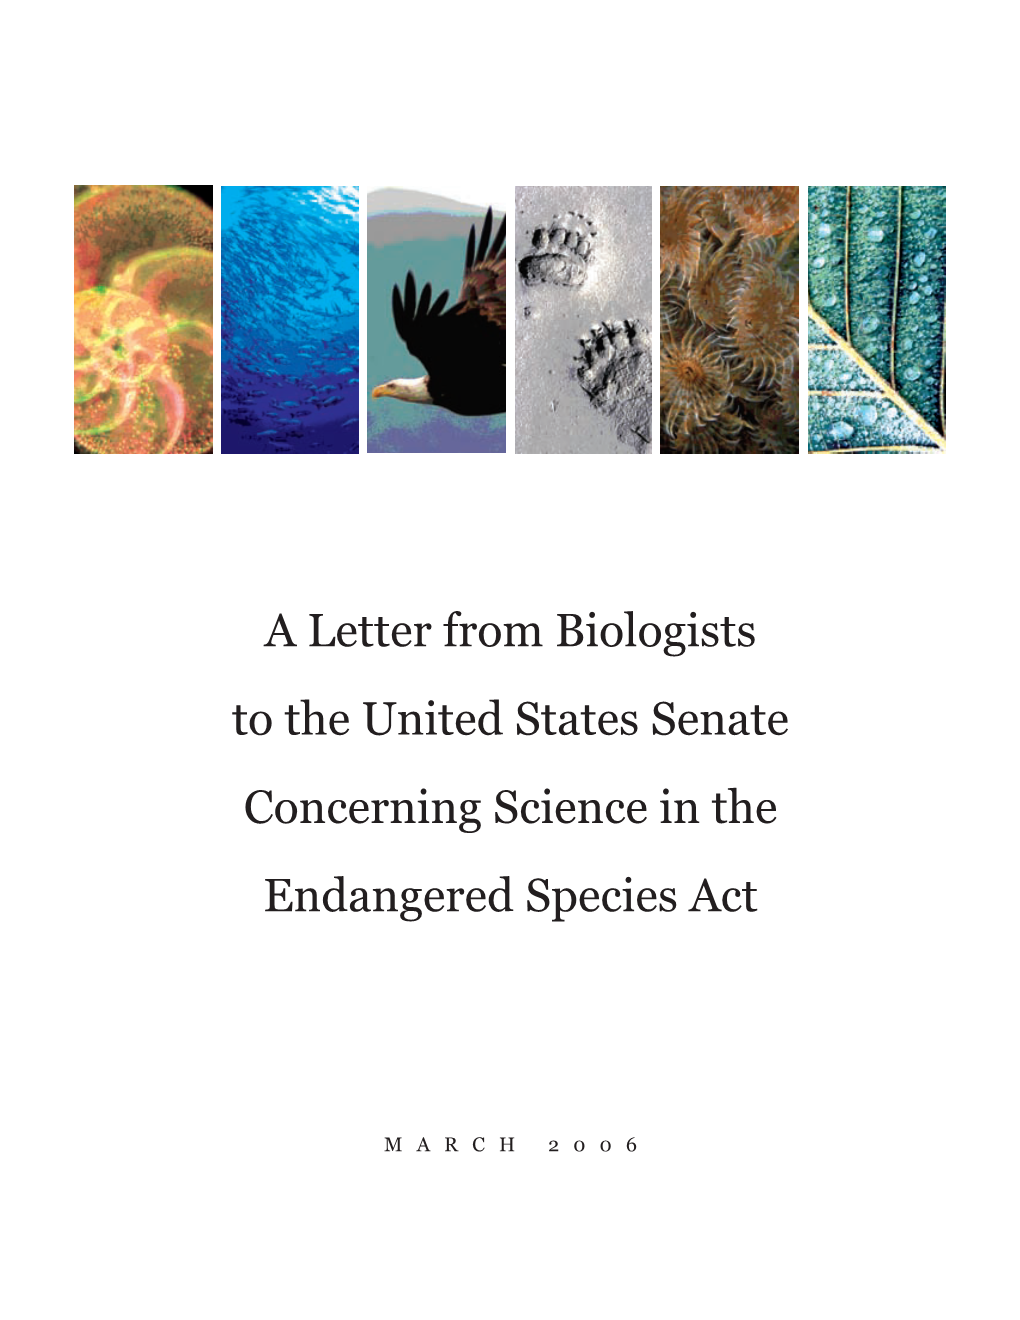 A Letter from Biologists to the United States Senate Concerning Science in the Endangered Species Act